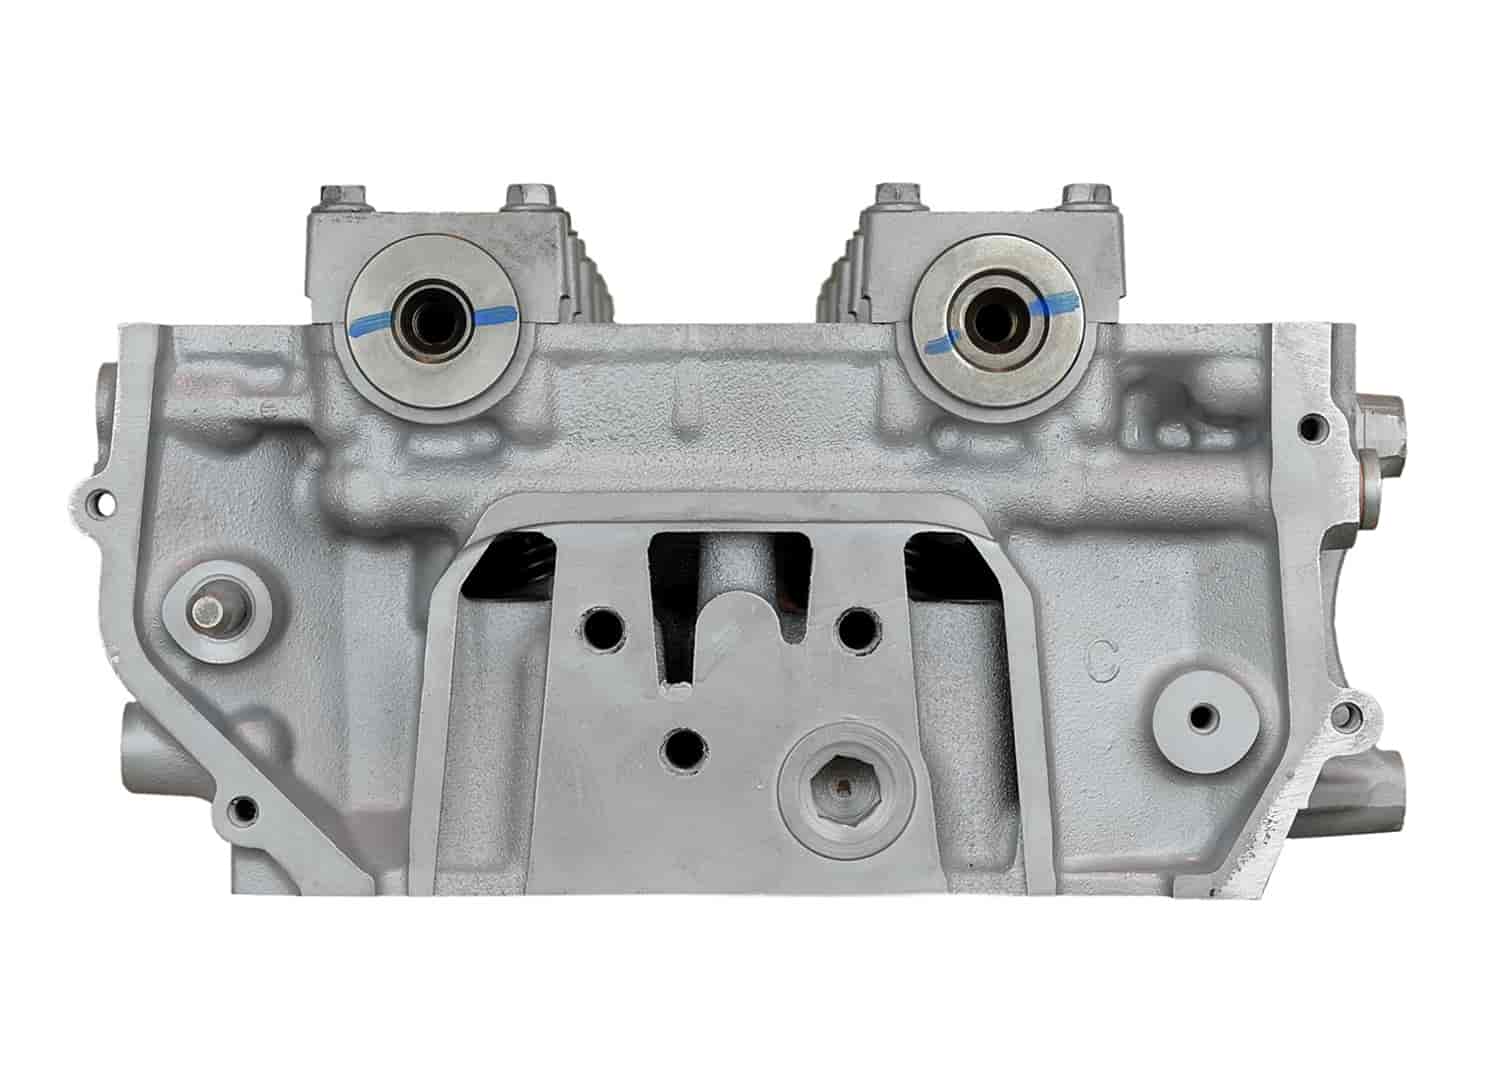 Remanufactured Cylinder Head for 2003-2008 Ford/Mazda with 2.3L